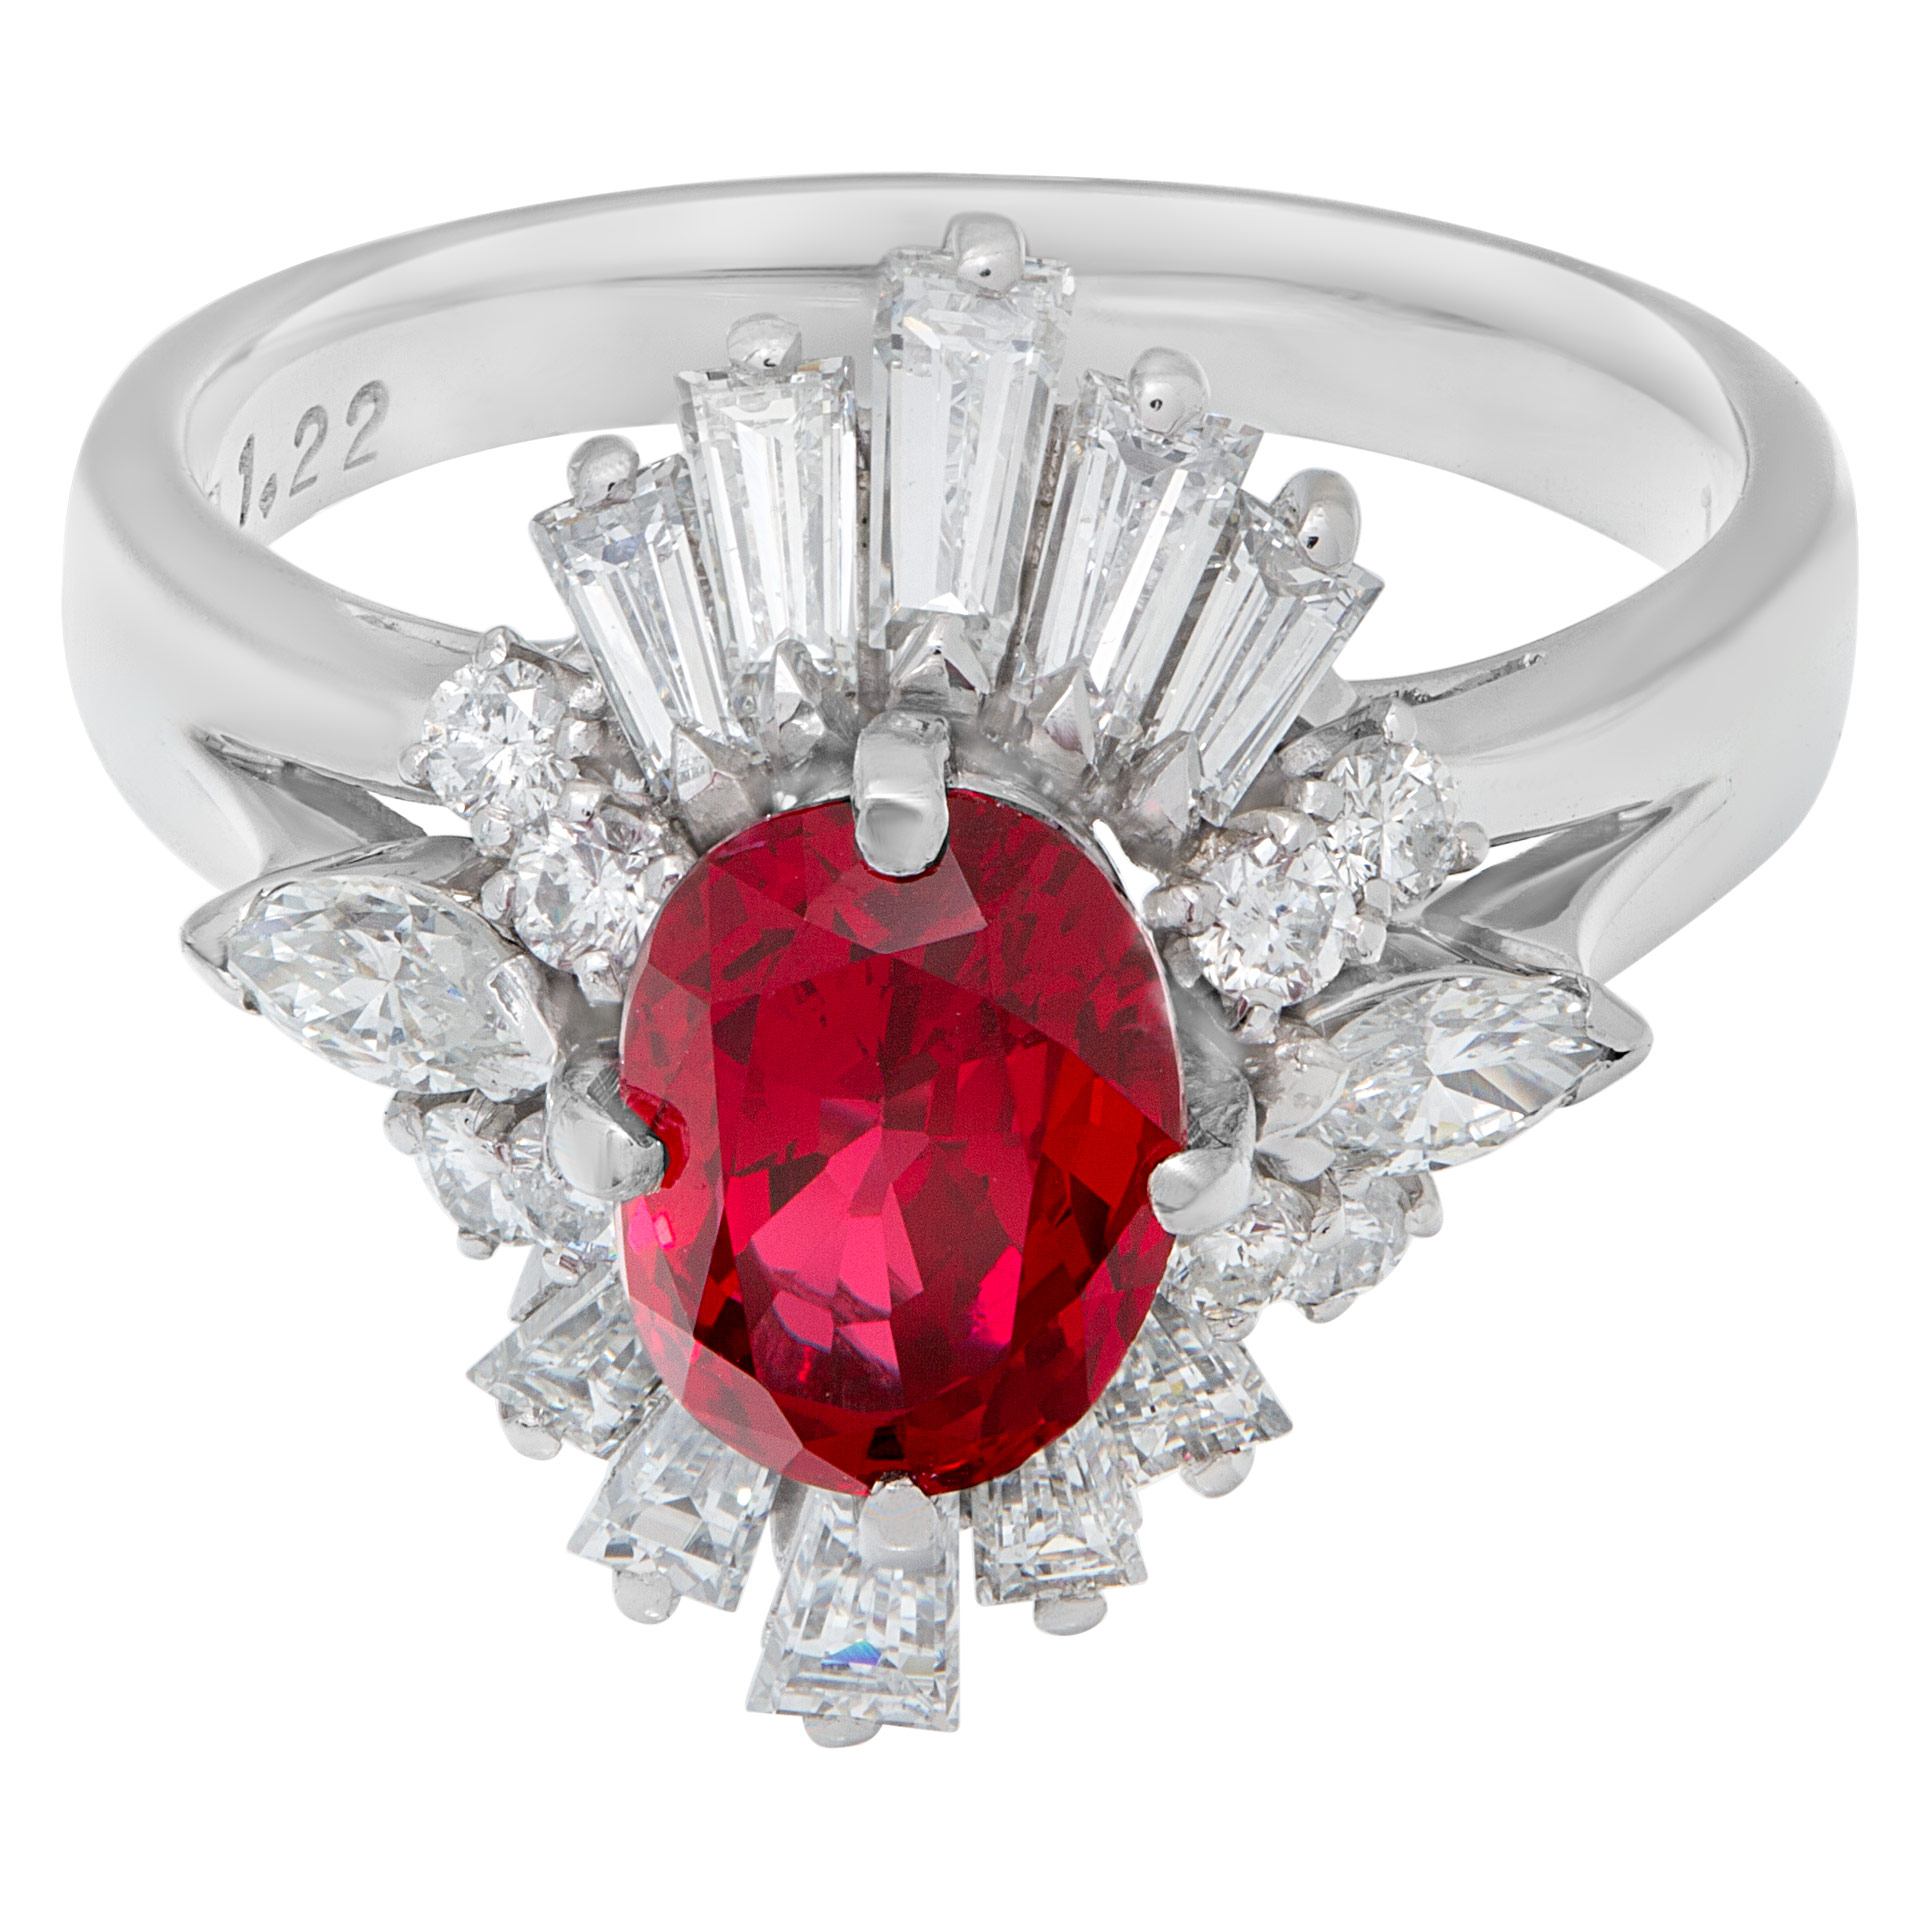 AGL certified oval 1.81 carat center ruby ring in platinum